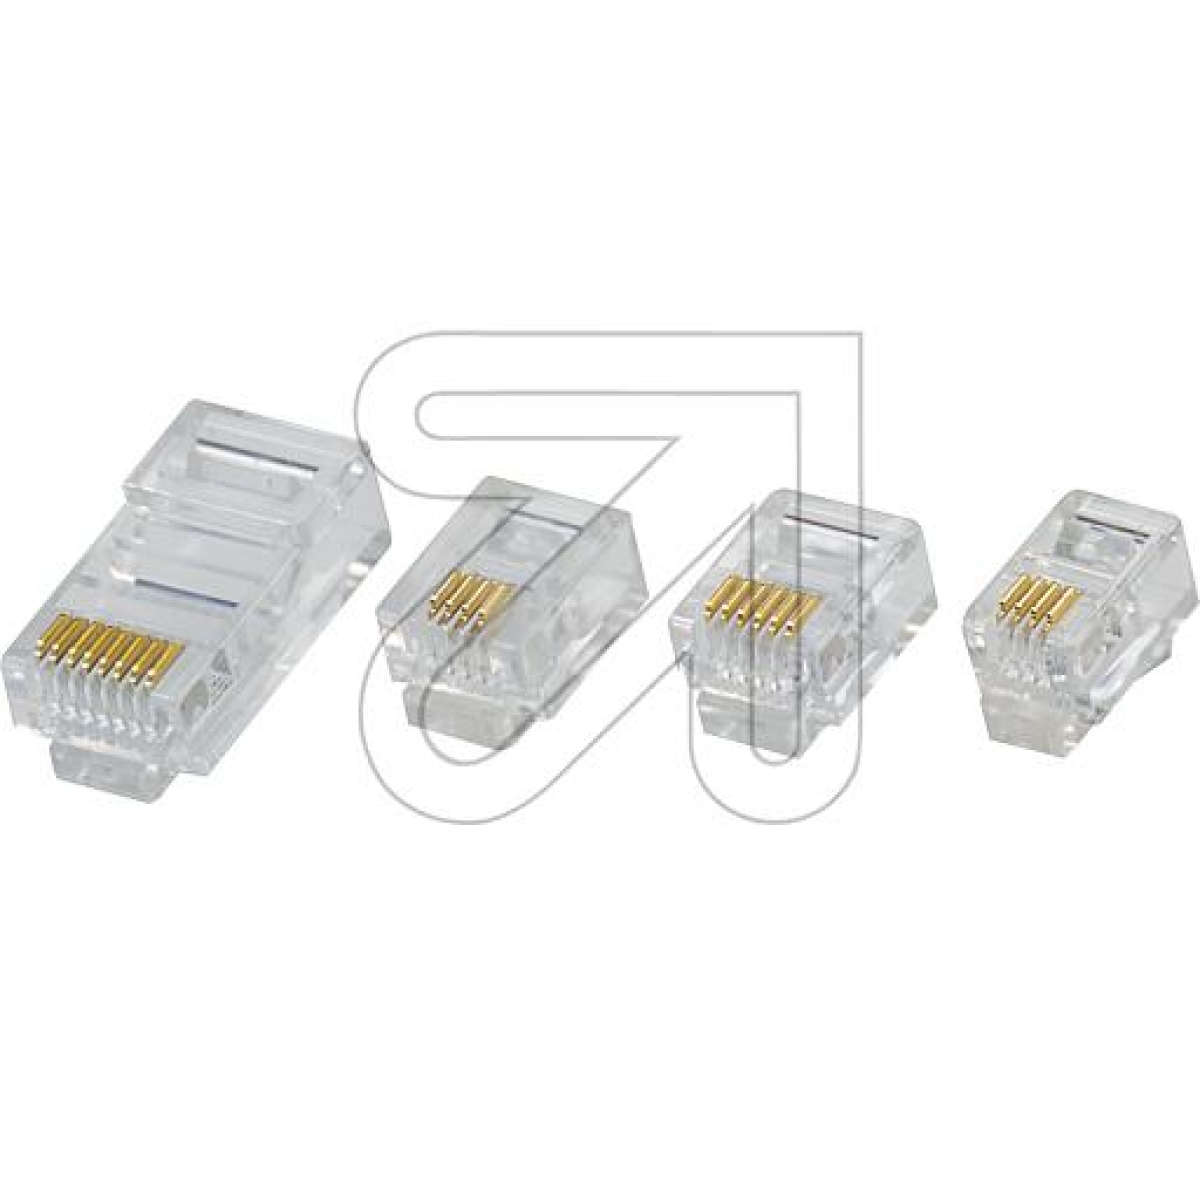 EGBModular plug 6/4 RJ 11 10 pieces in a polybag!-Price for 10 pcs.Article-No: 235260